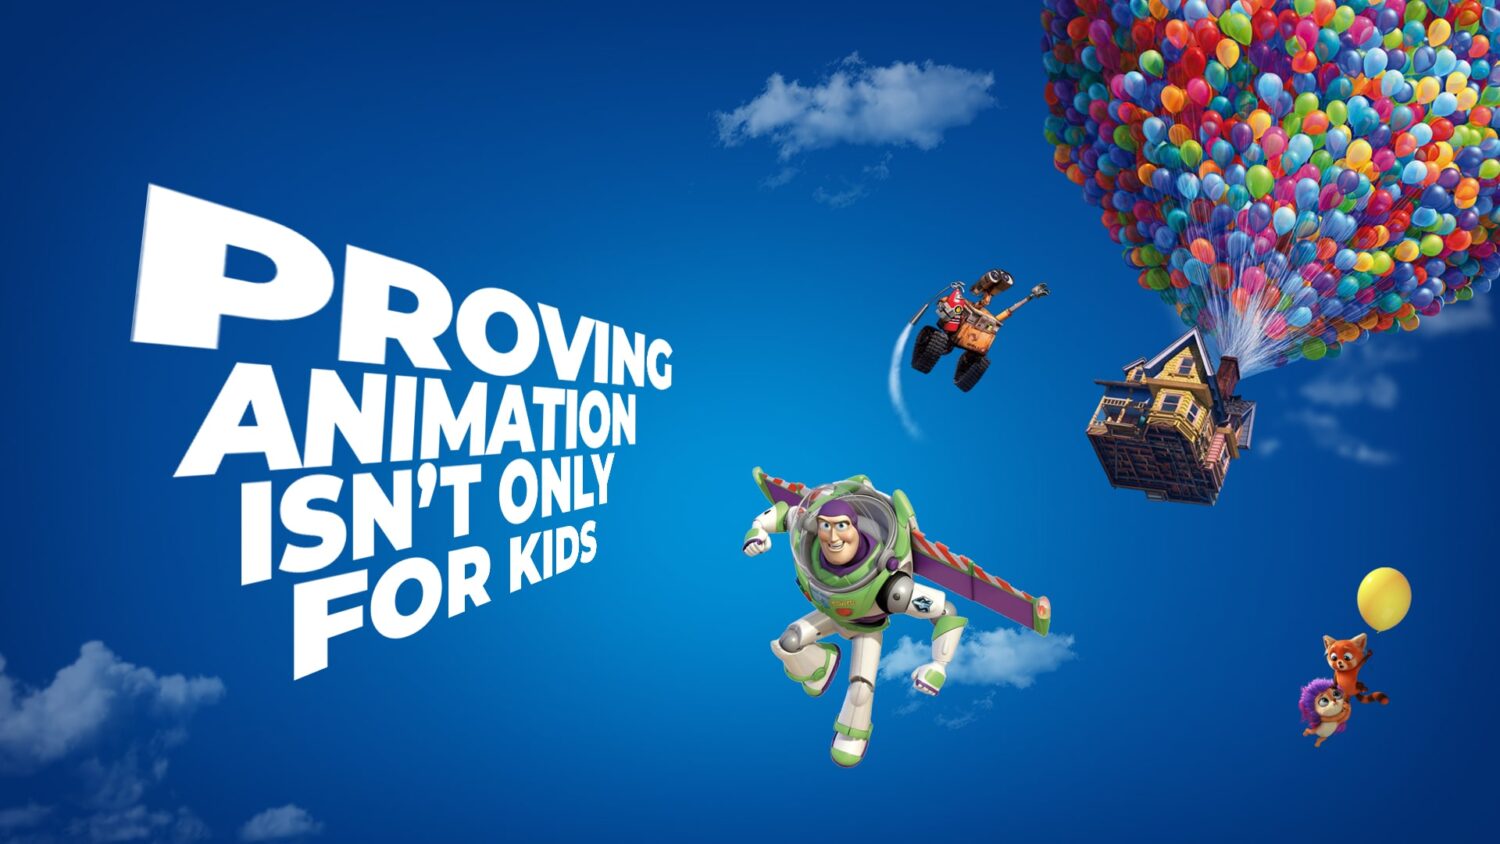 Image of UP's house of balloons, Buzz Lightyear, Wall-E, and Dream Farm Studios' characters for a blog cover